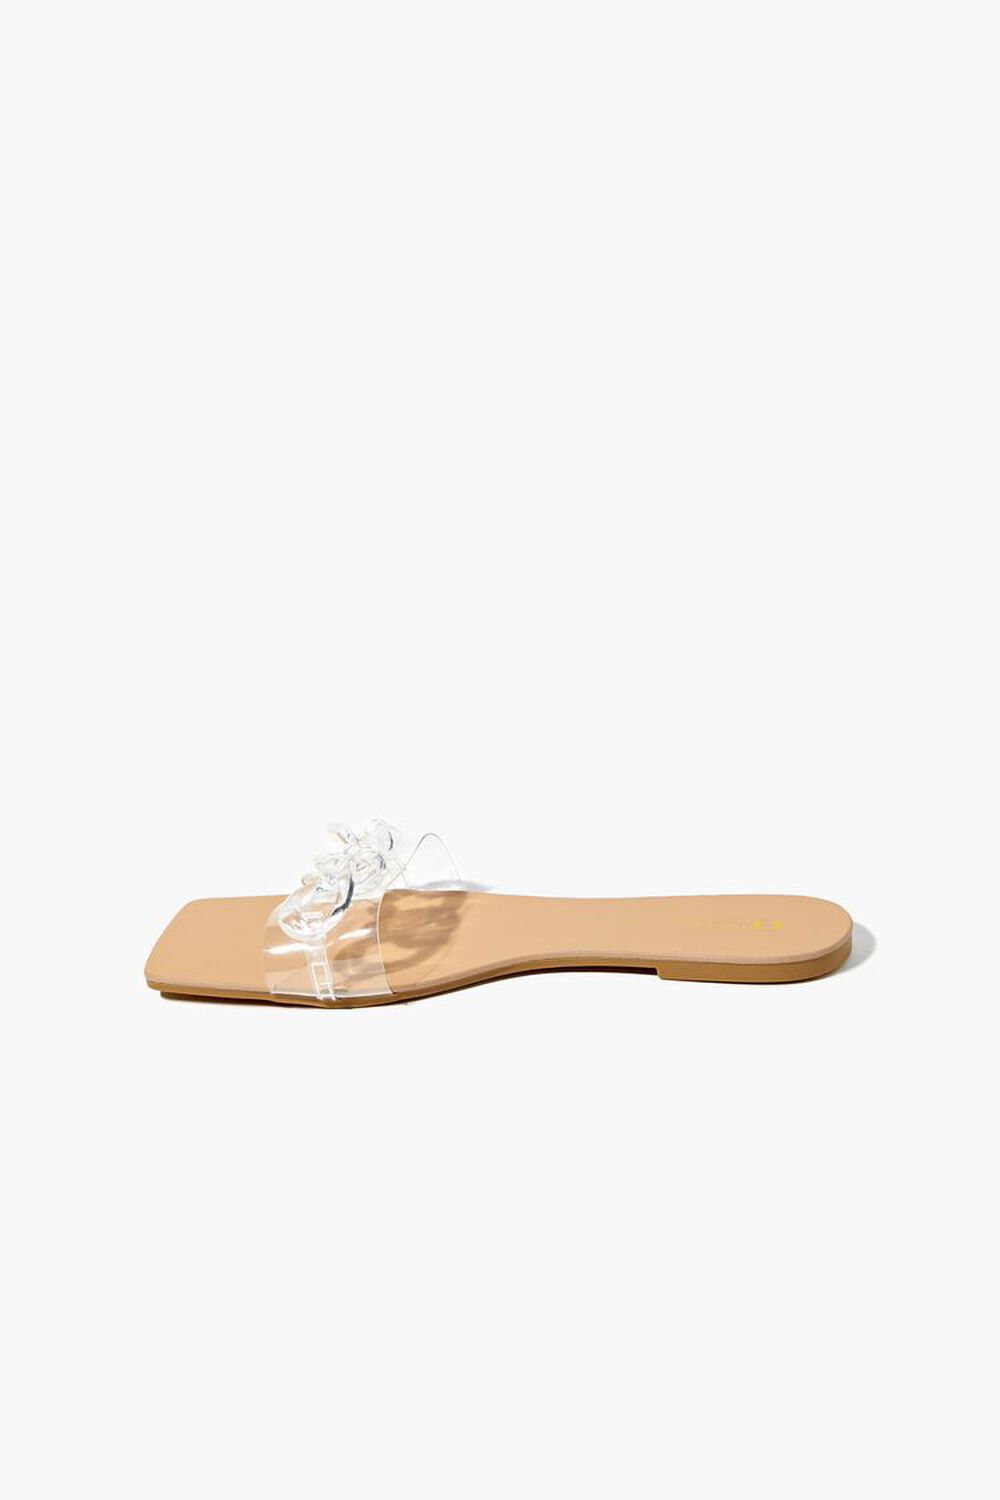 NATURAL/CLEAR Chain Faux Leather Sandals, image 2